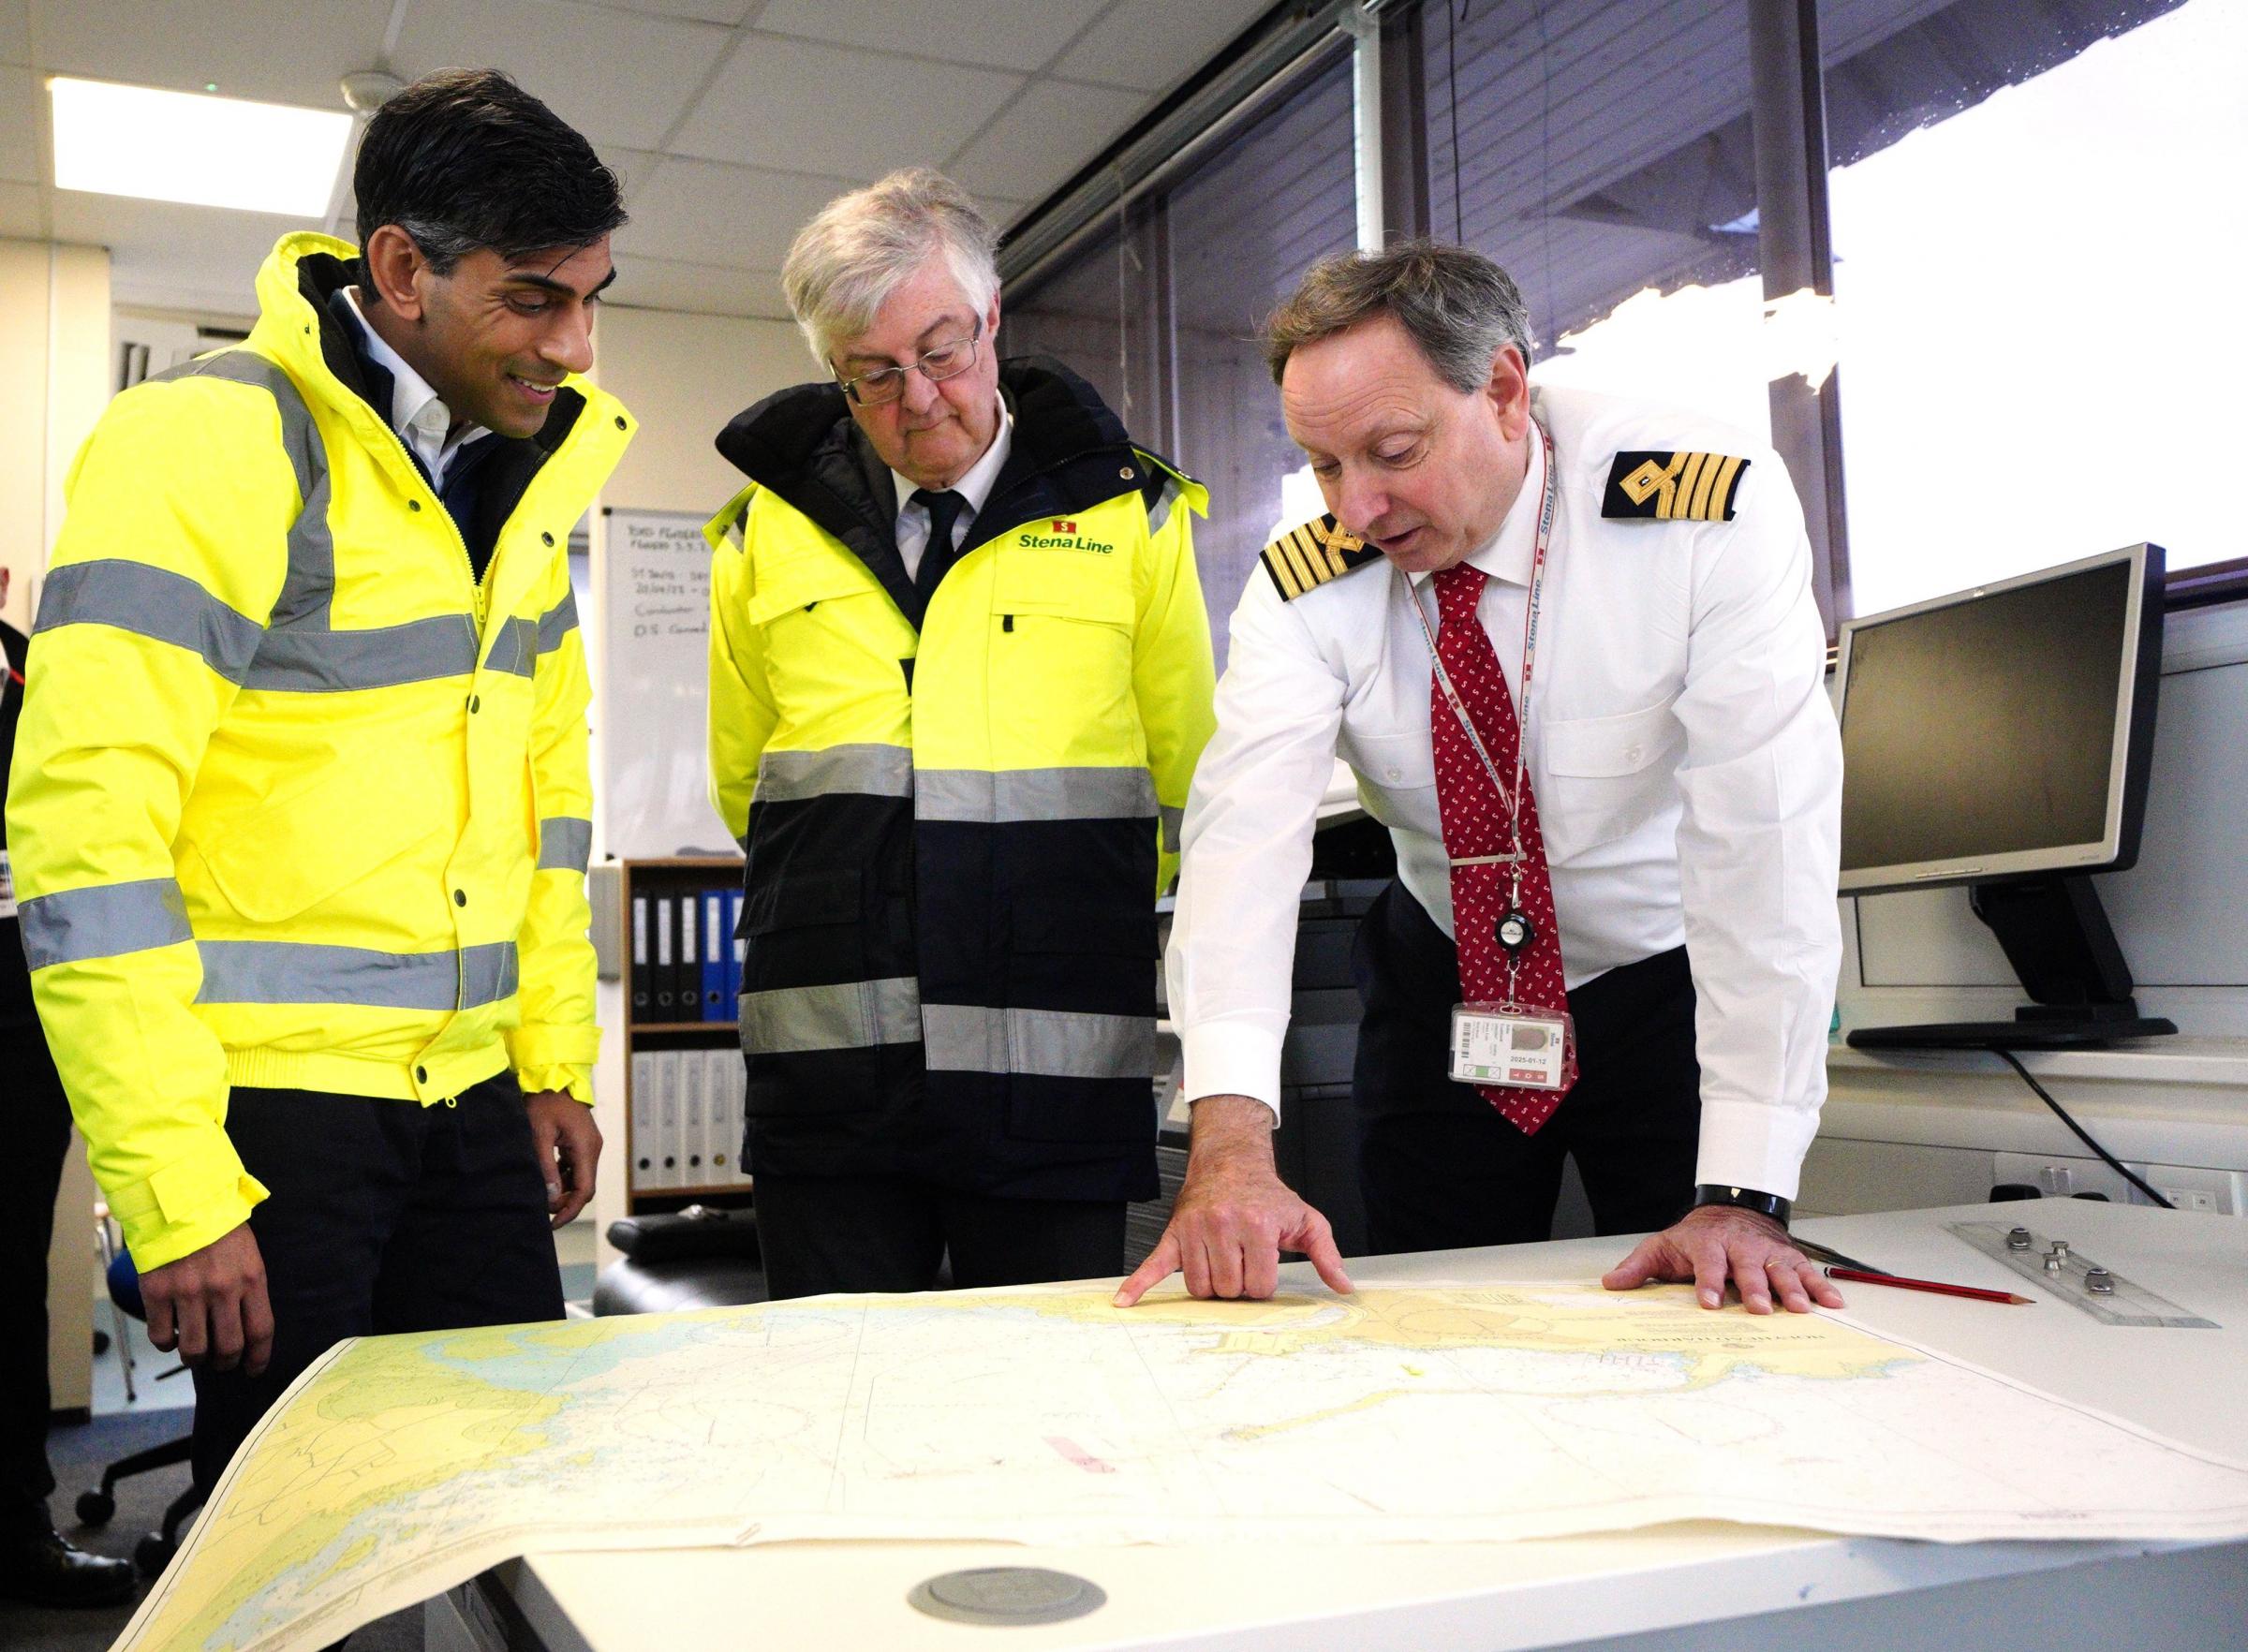 (left to right) Prime Minister Rishi Sunak and First Minister of Wales Mark Drakeford with John Goddard harbour master looking at charts during a visit to the Port of Holyhead in Anglesey, North Wales, for the announcement of the creation of two